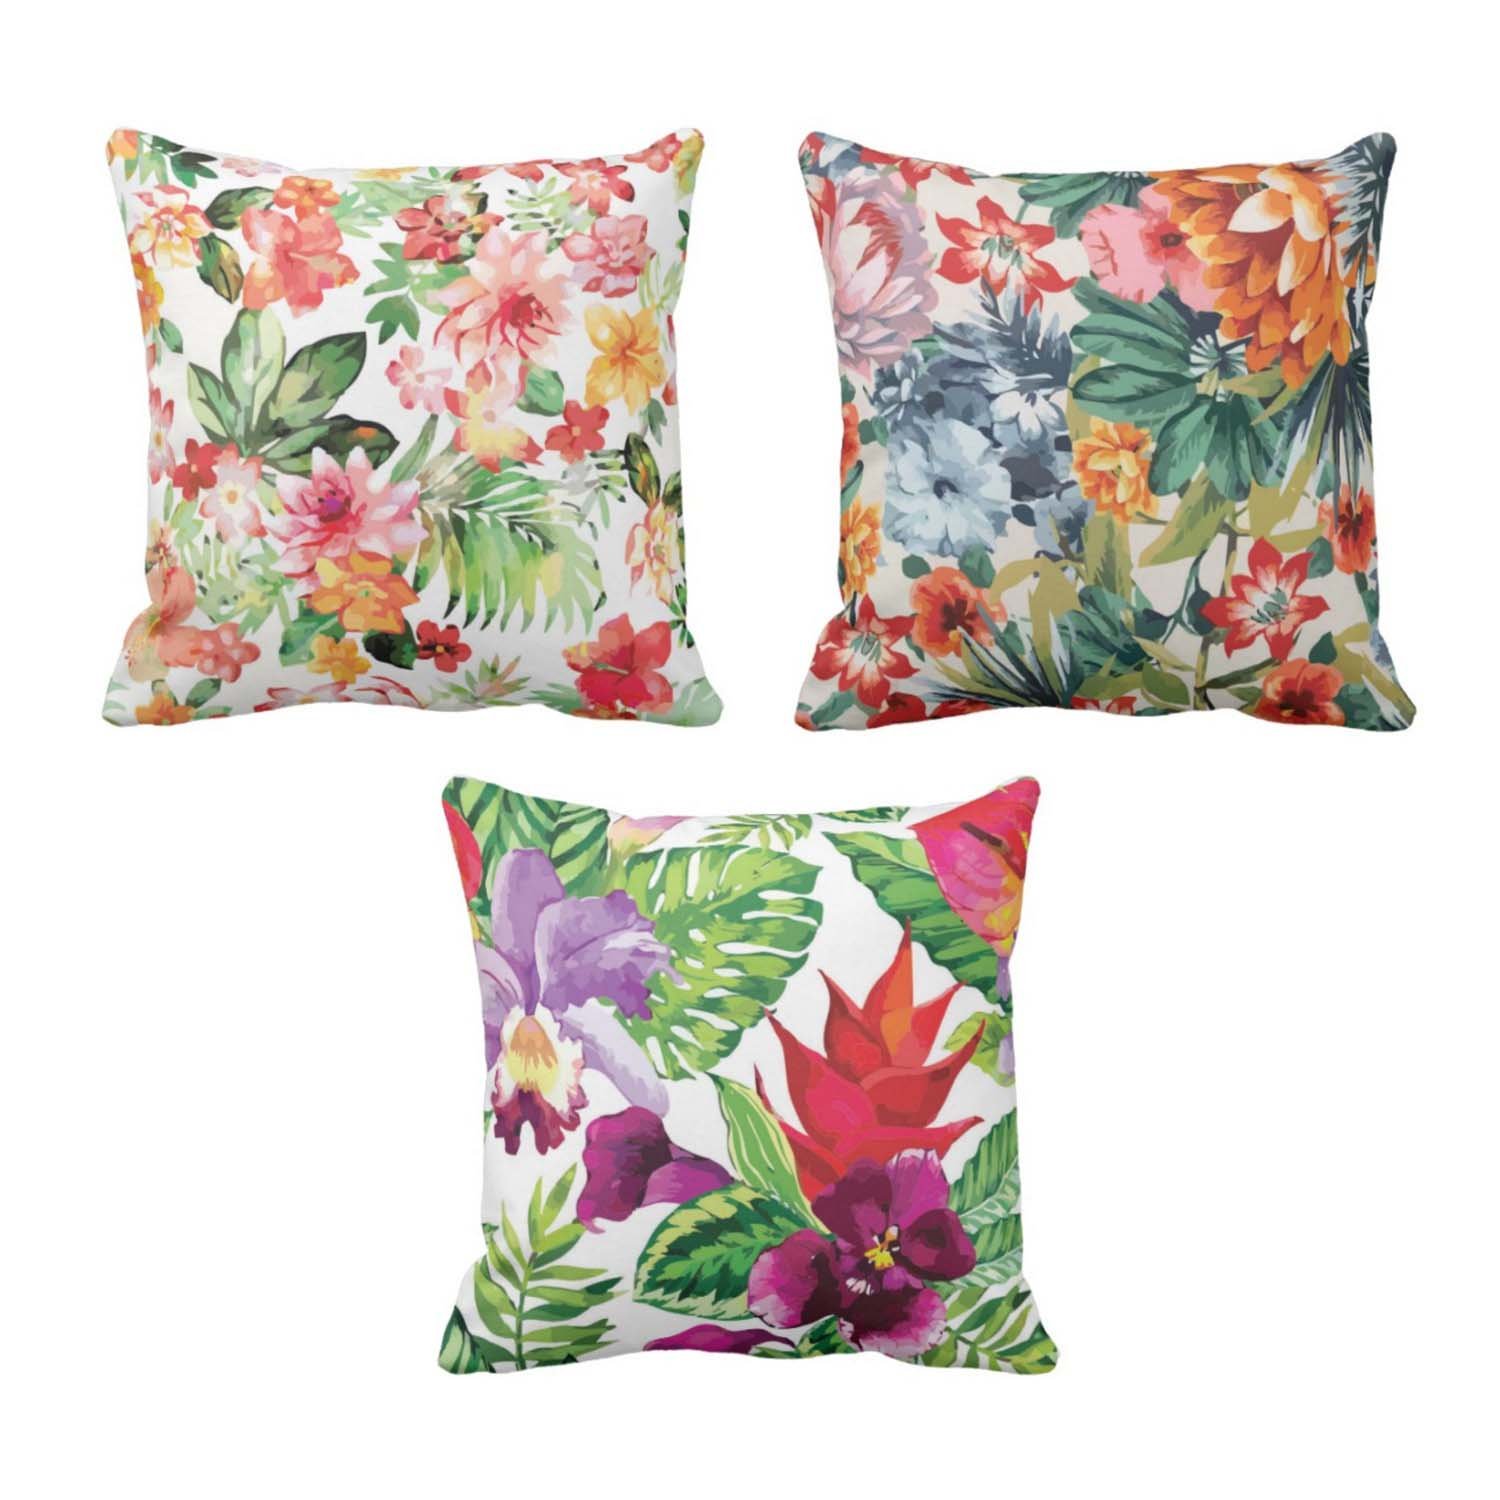 Bright Floral Cushion Cover Set of 3 KH2935